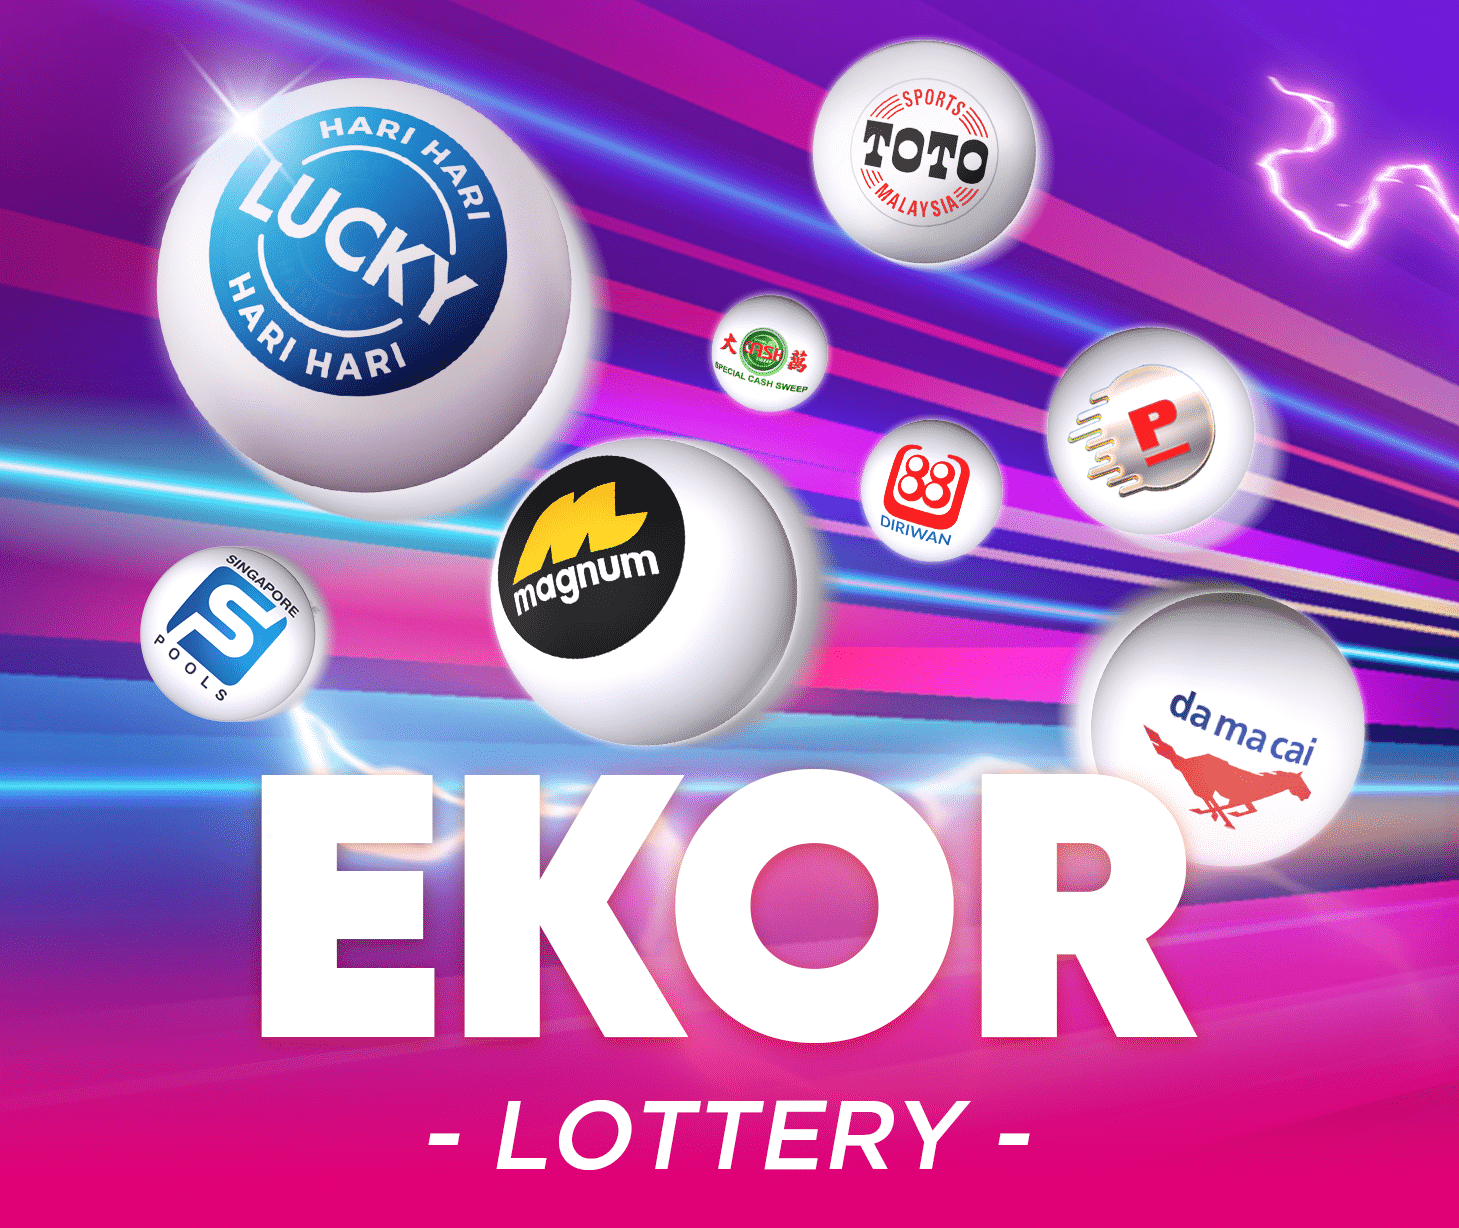 ekor 4d lottery online malaysia